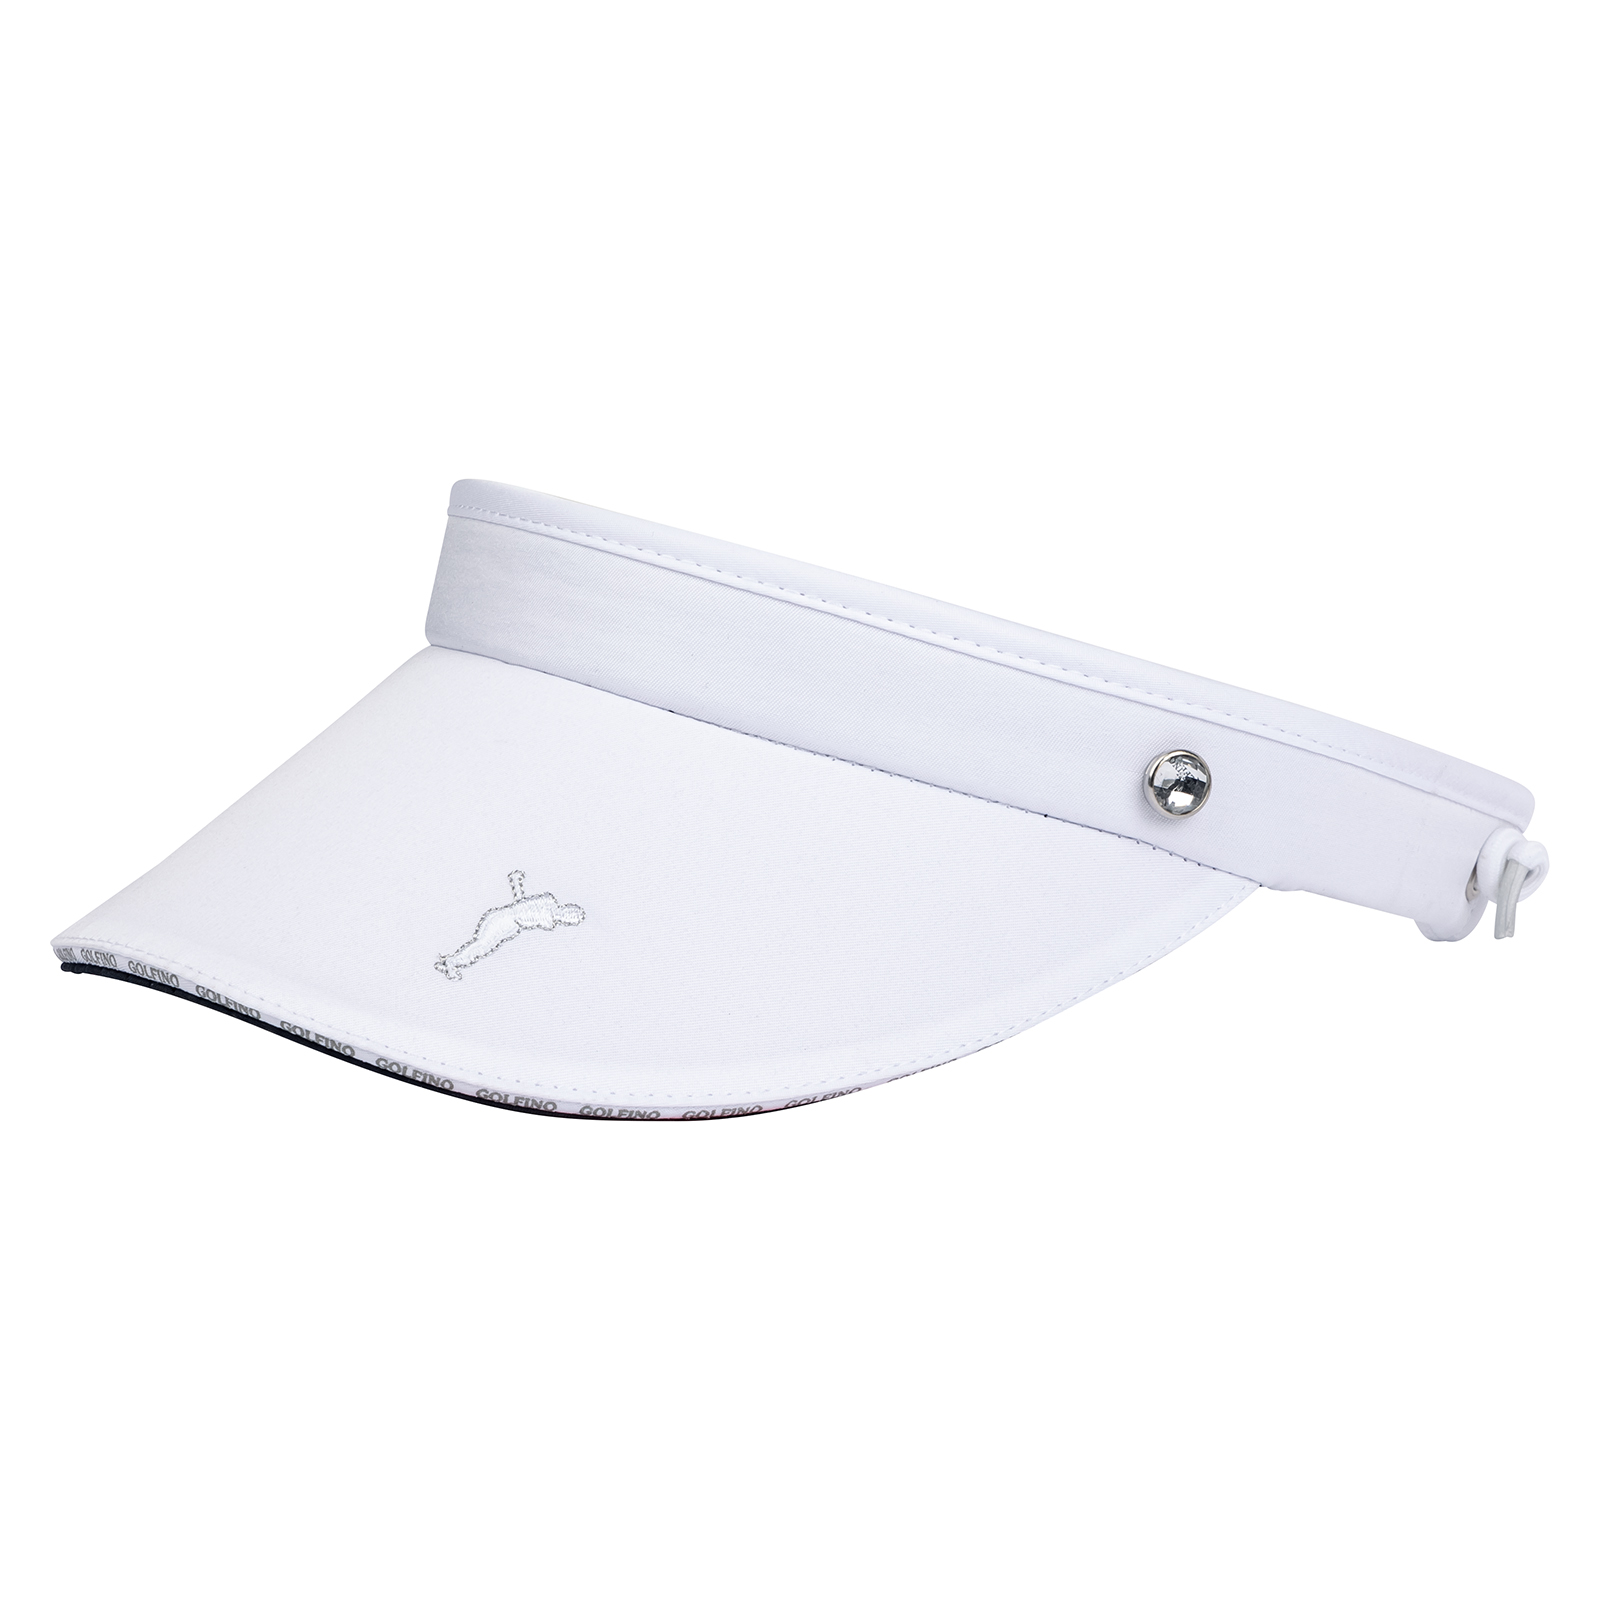 Ladies' golf visor with soft terry towelling sweatband 